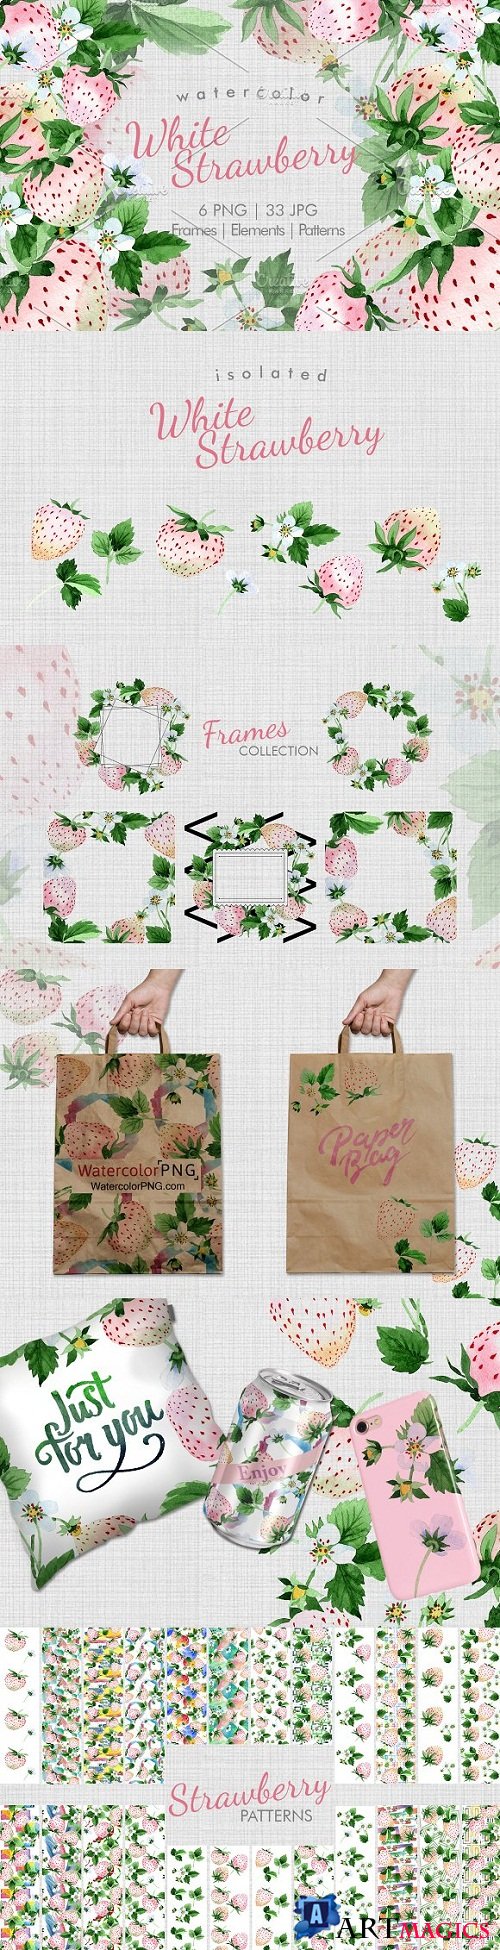 White Strawberry PNG watercolor set - 2960734